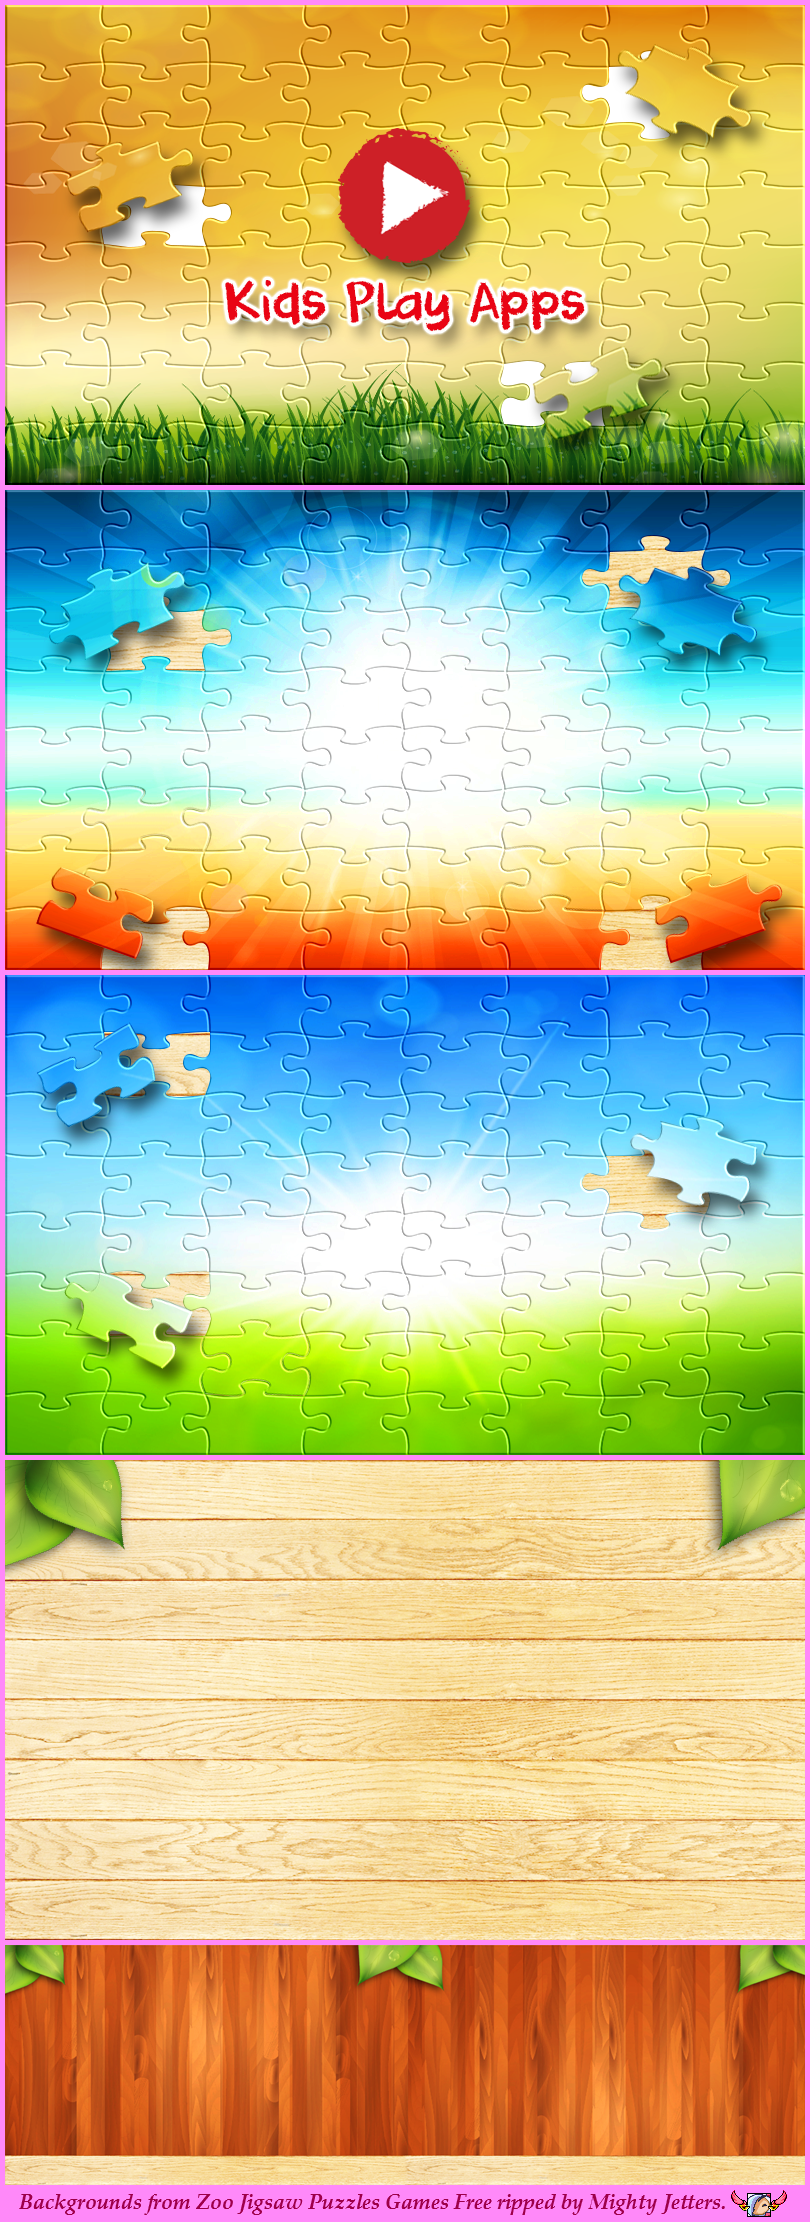 Zoo Jigsaw Puzzles Games Free - Backgrounds